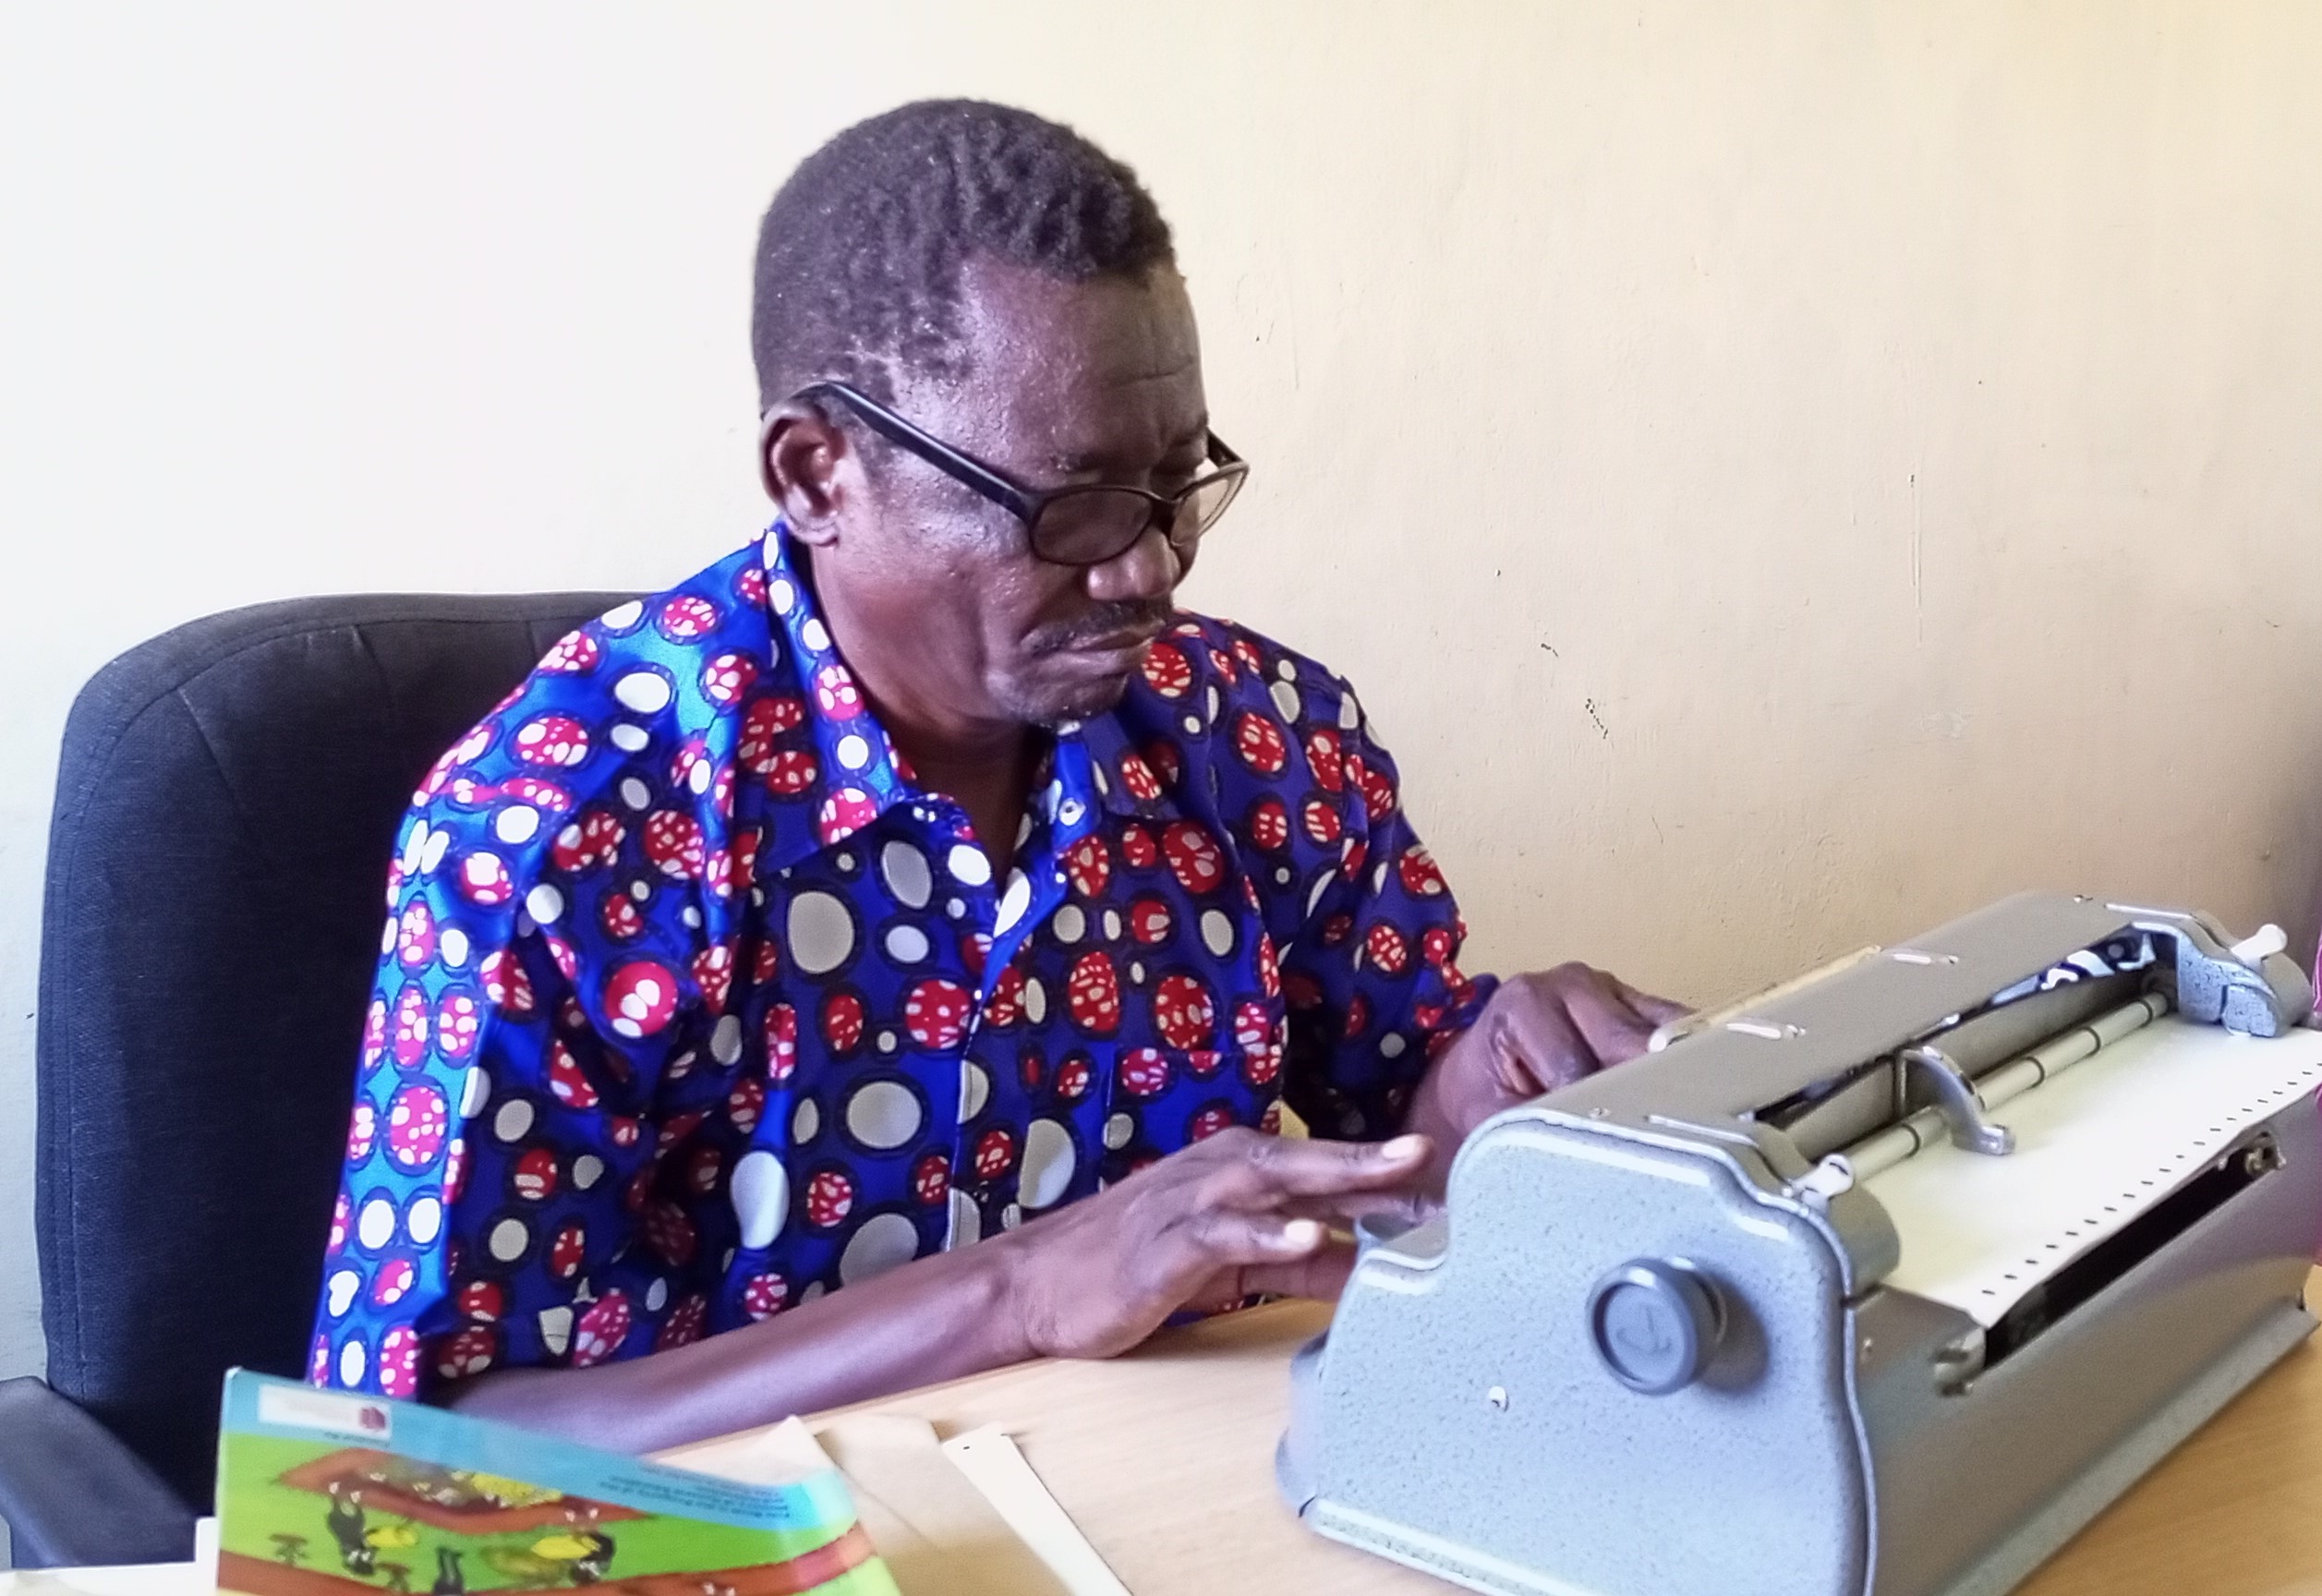 The visually impaired teachers transcribing textbooks into braille